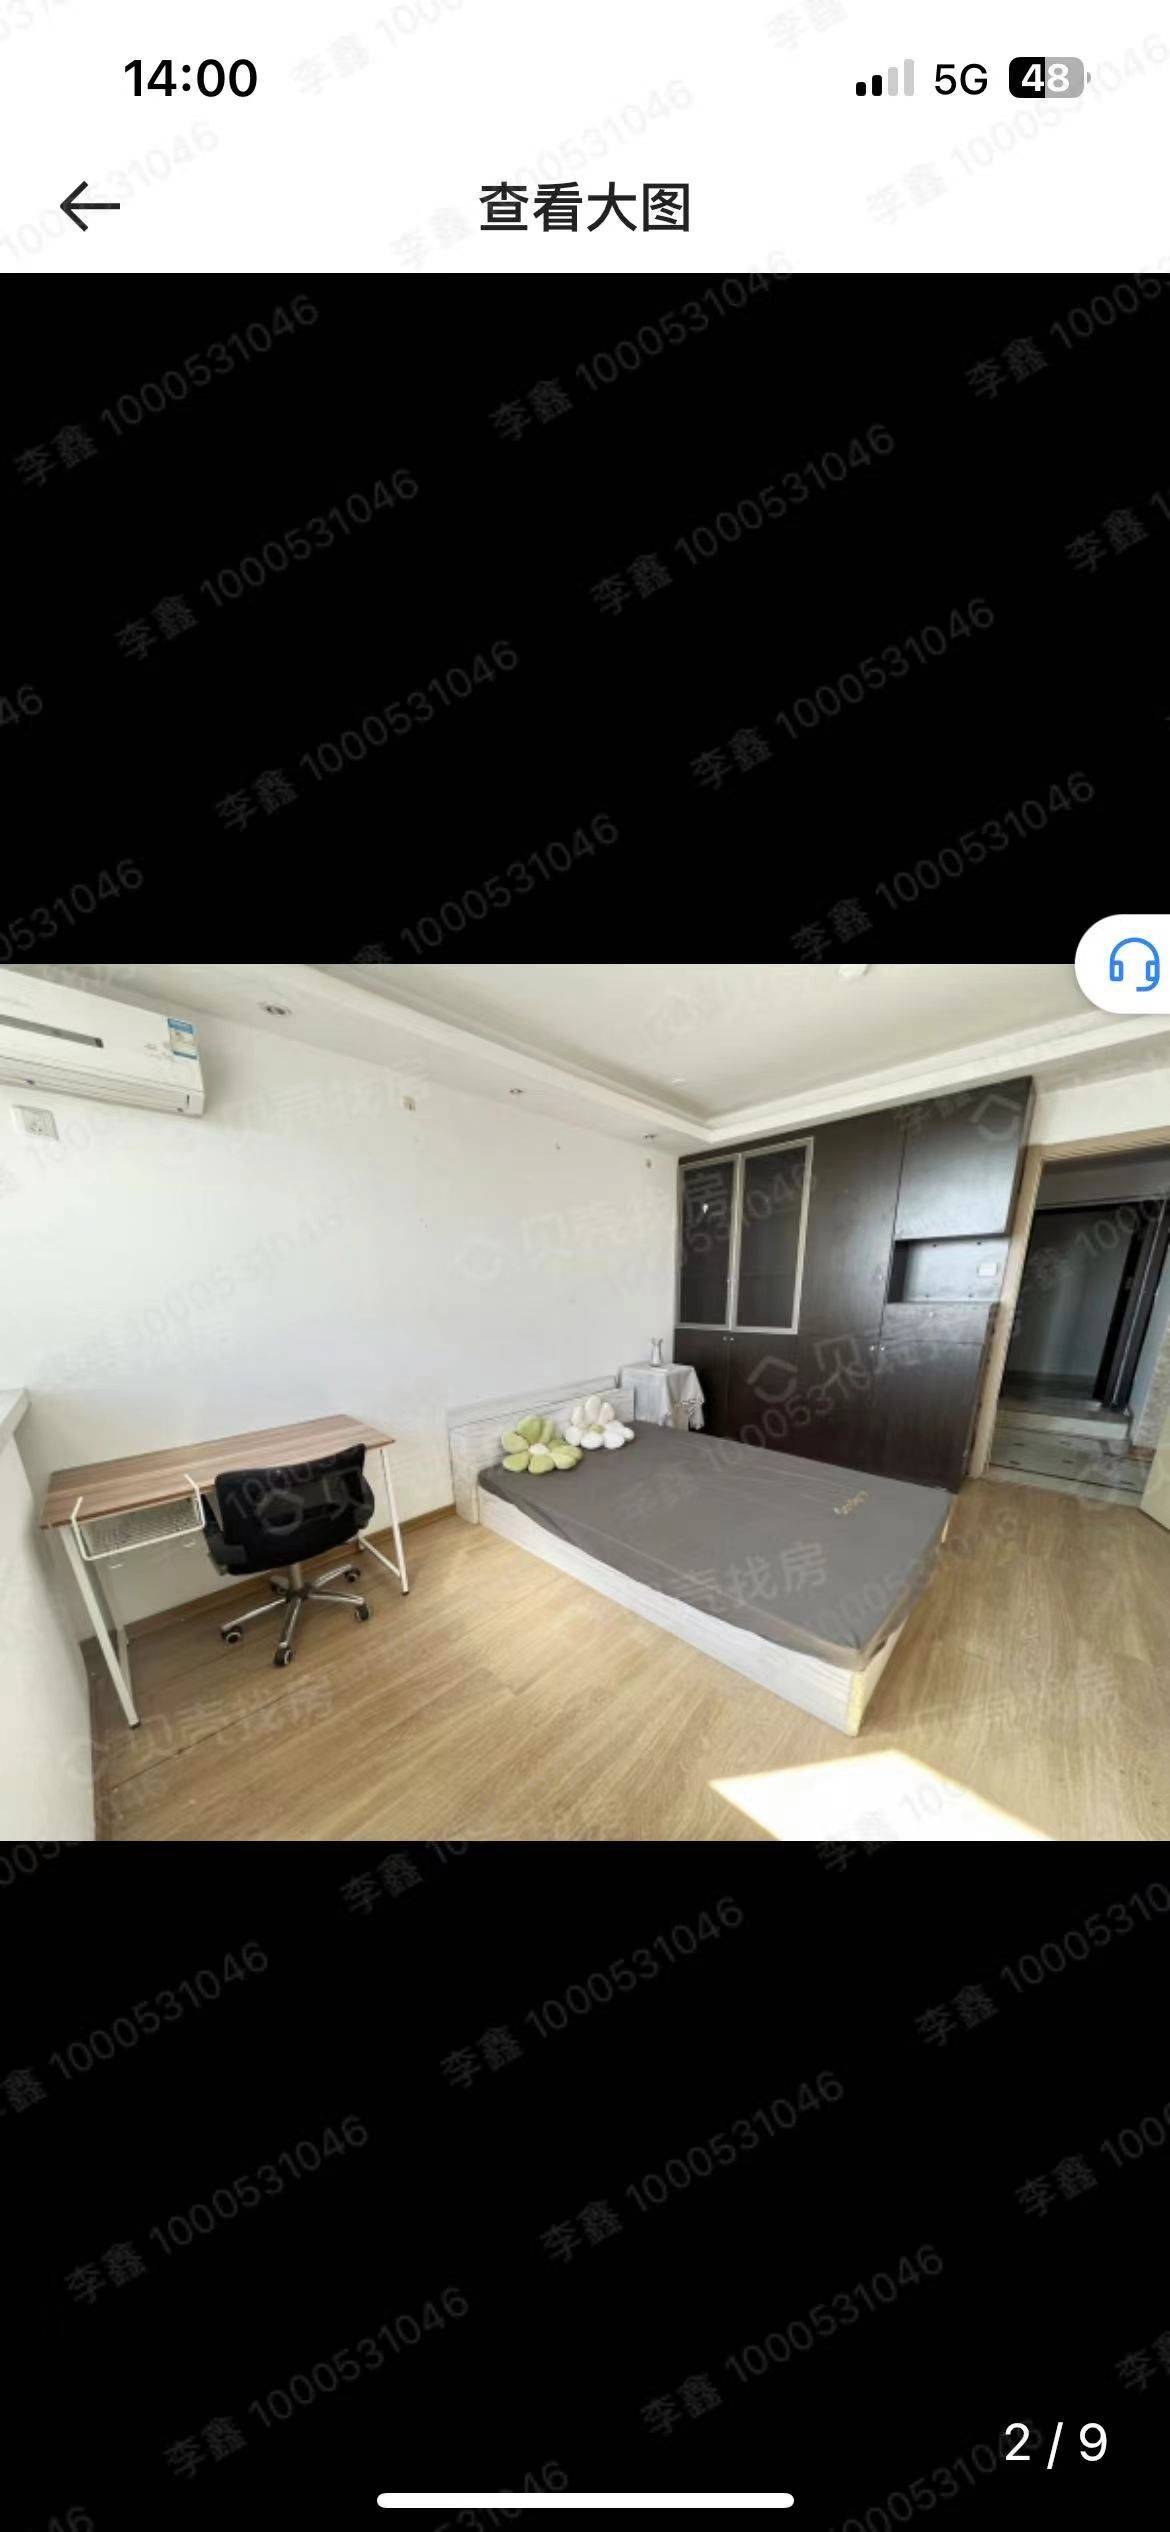 Tianjin-Xiqing-Cozy Home,Clean&Comfy,No Gender Limit,Hustle & Bustle,Chilled